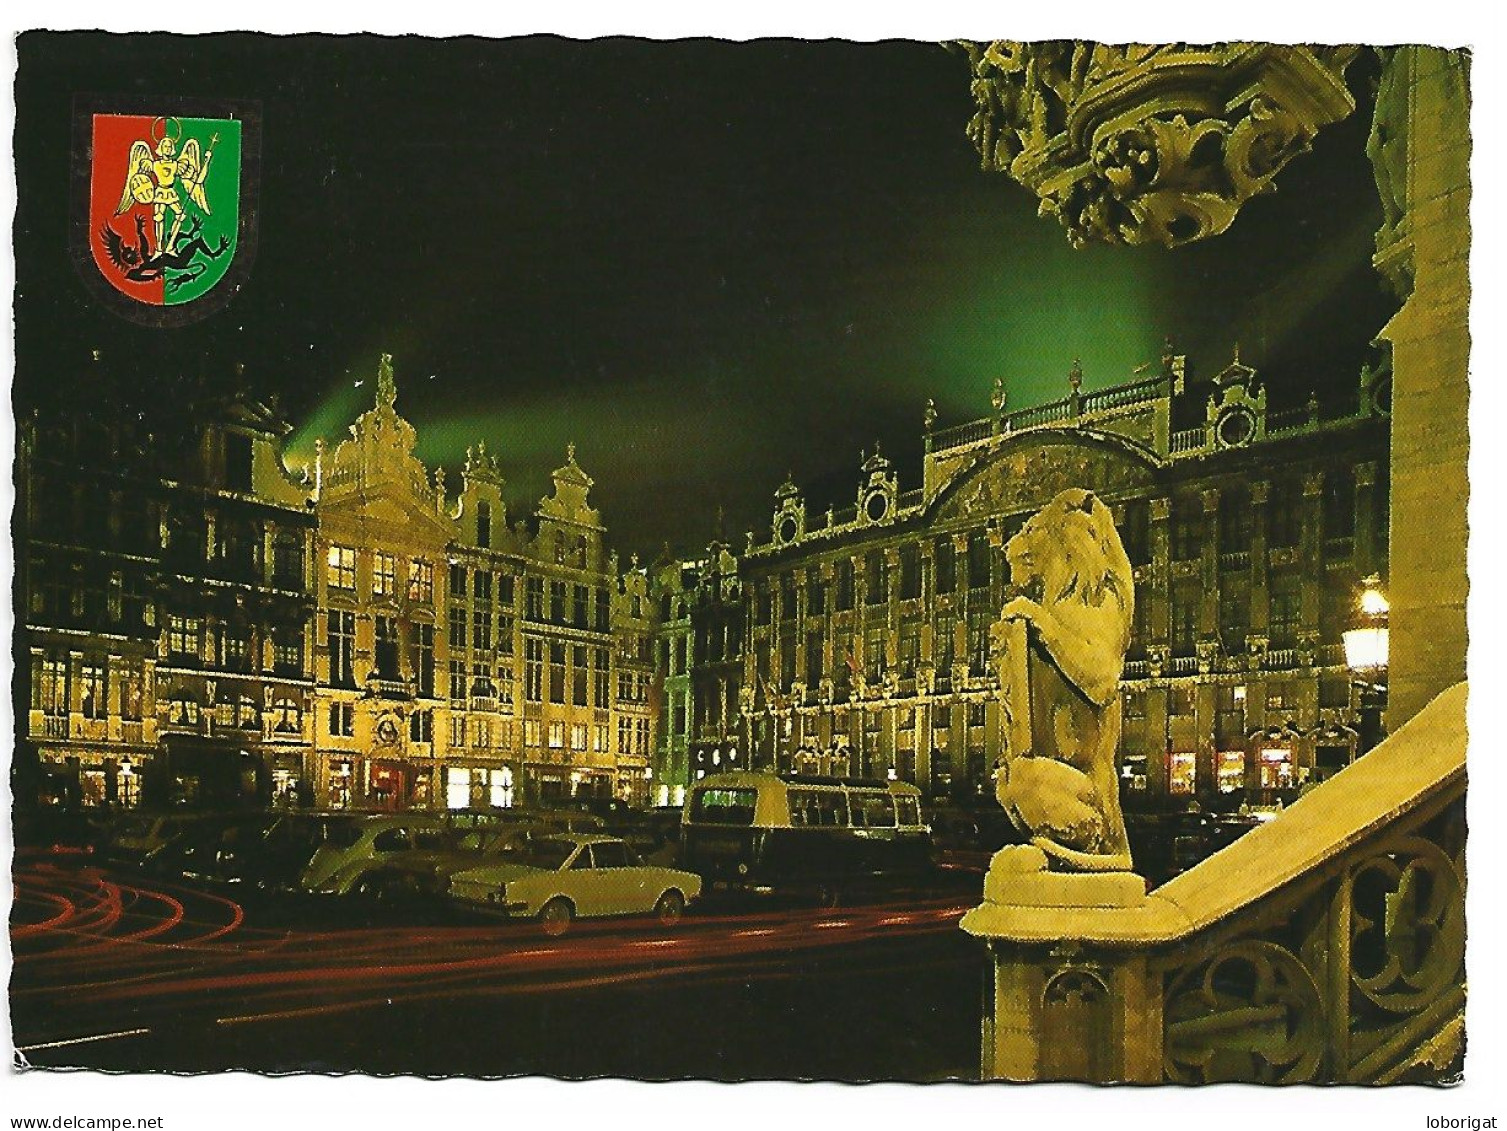 GRAND PLACE / MARKET PLACE.- BRUXELLES - BRUSSEL.-  ( BELGICA ) - Brussels By Night